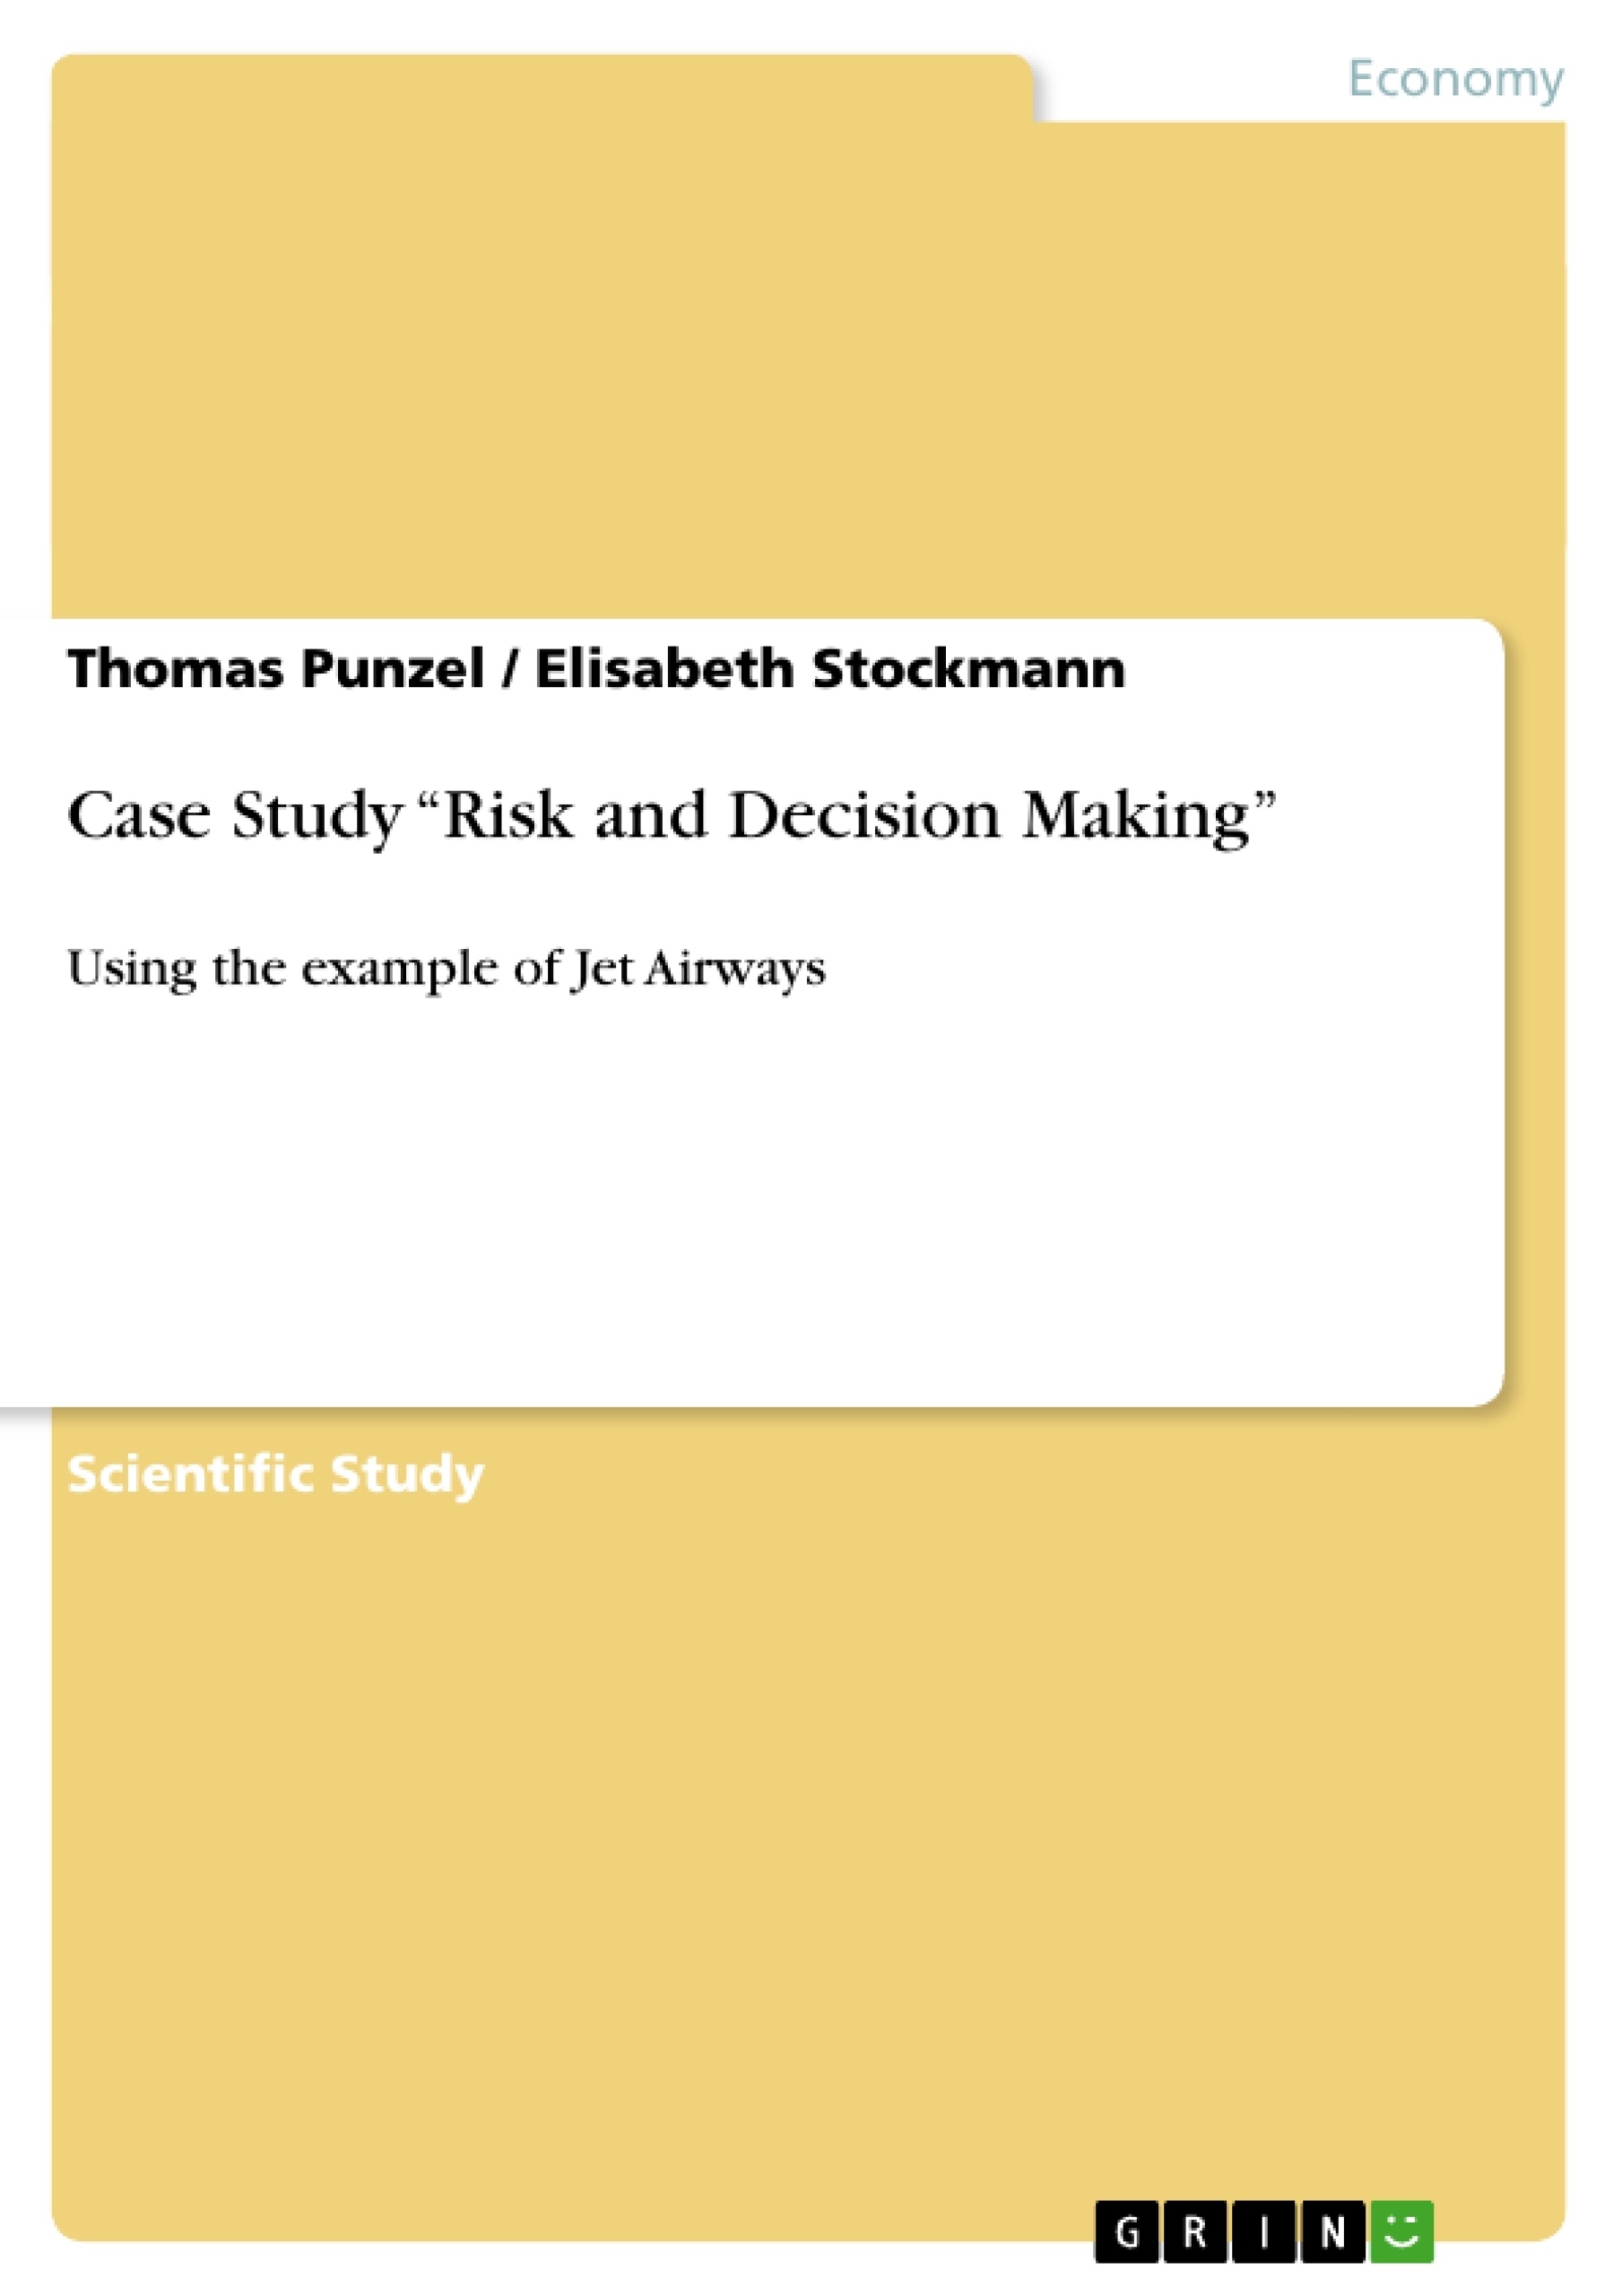 Title: Case Study “Risk and Decision Making”